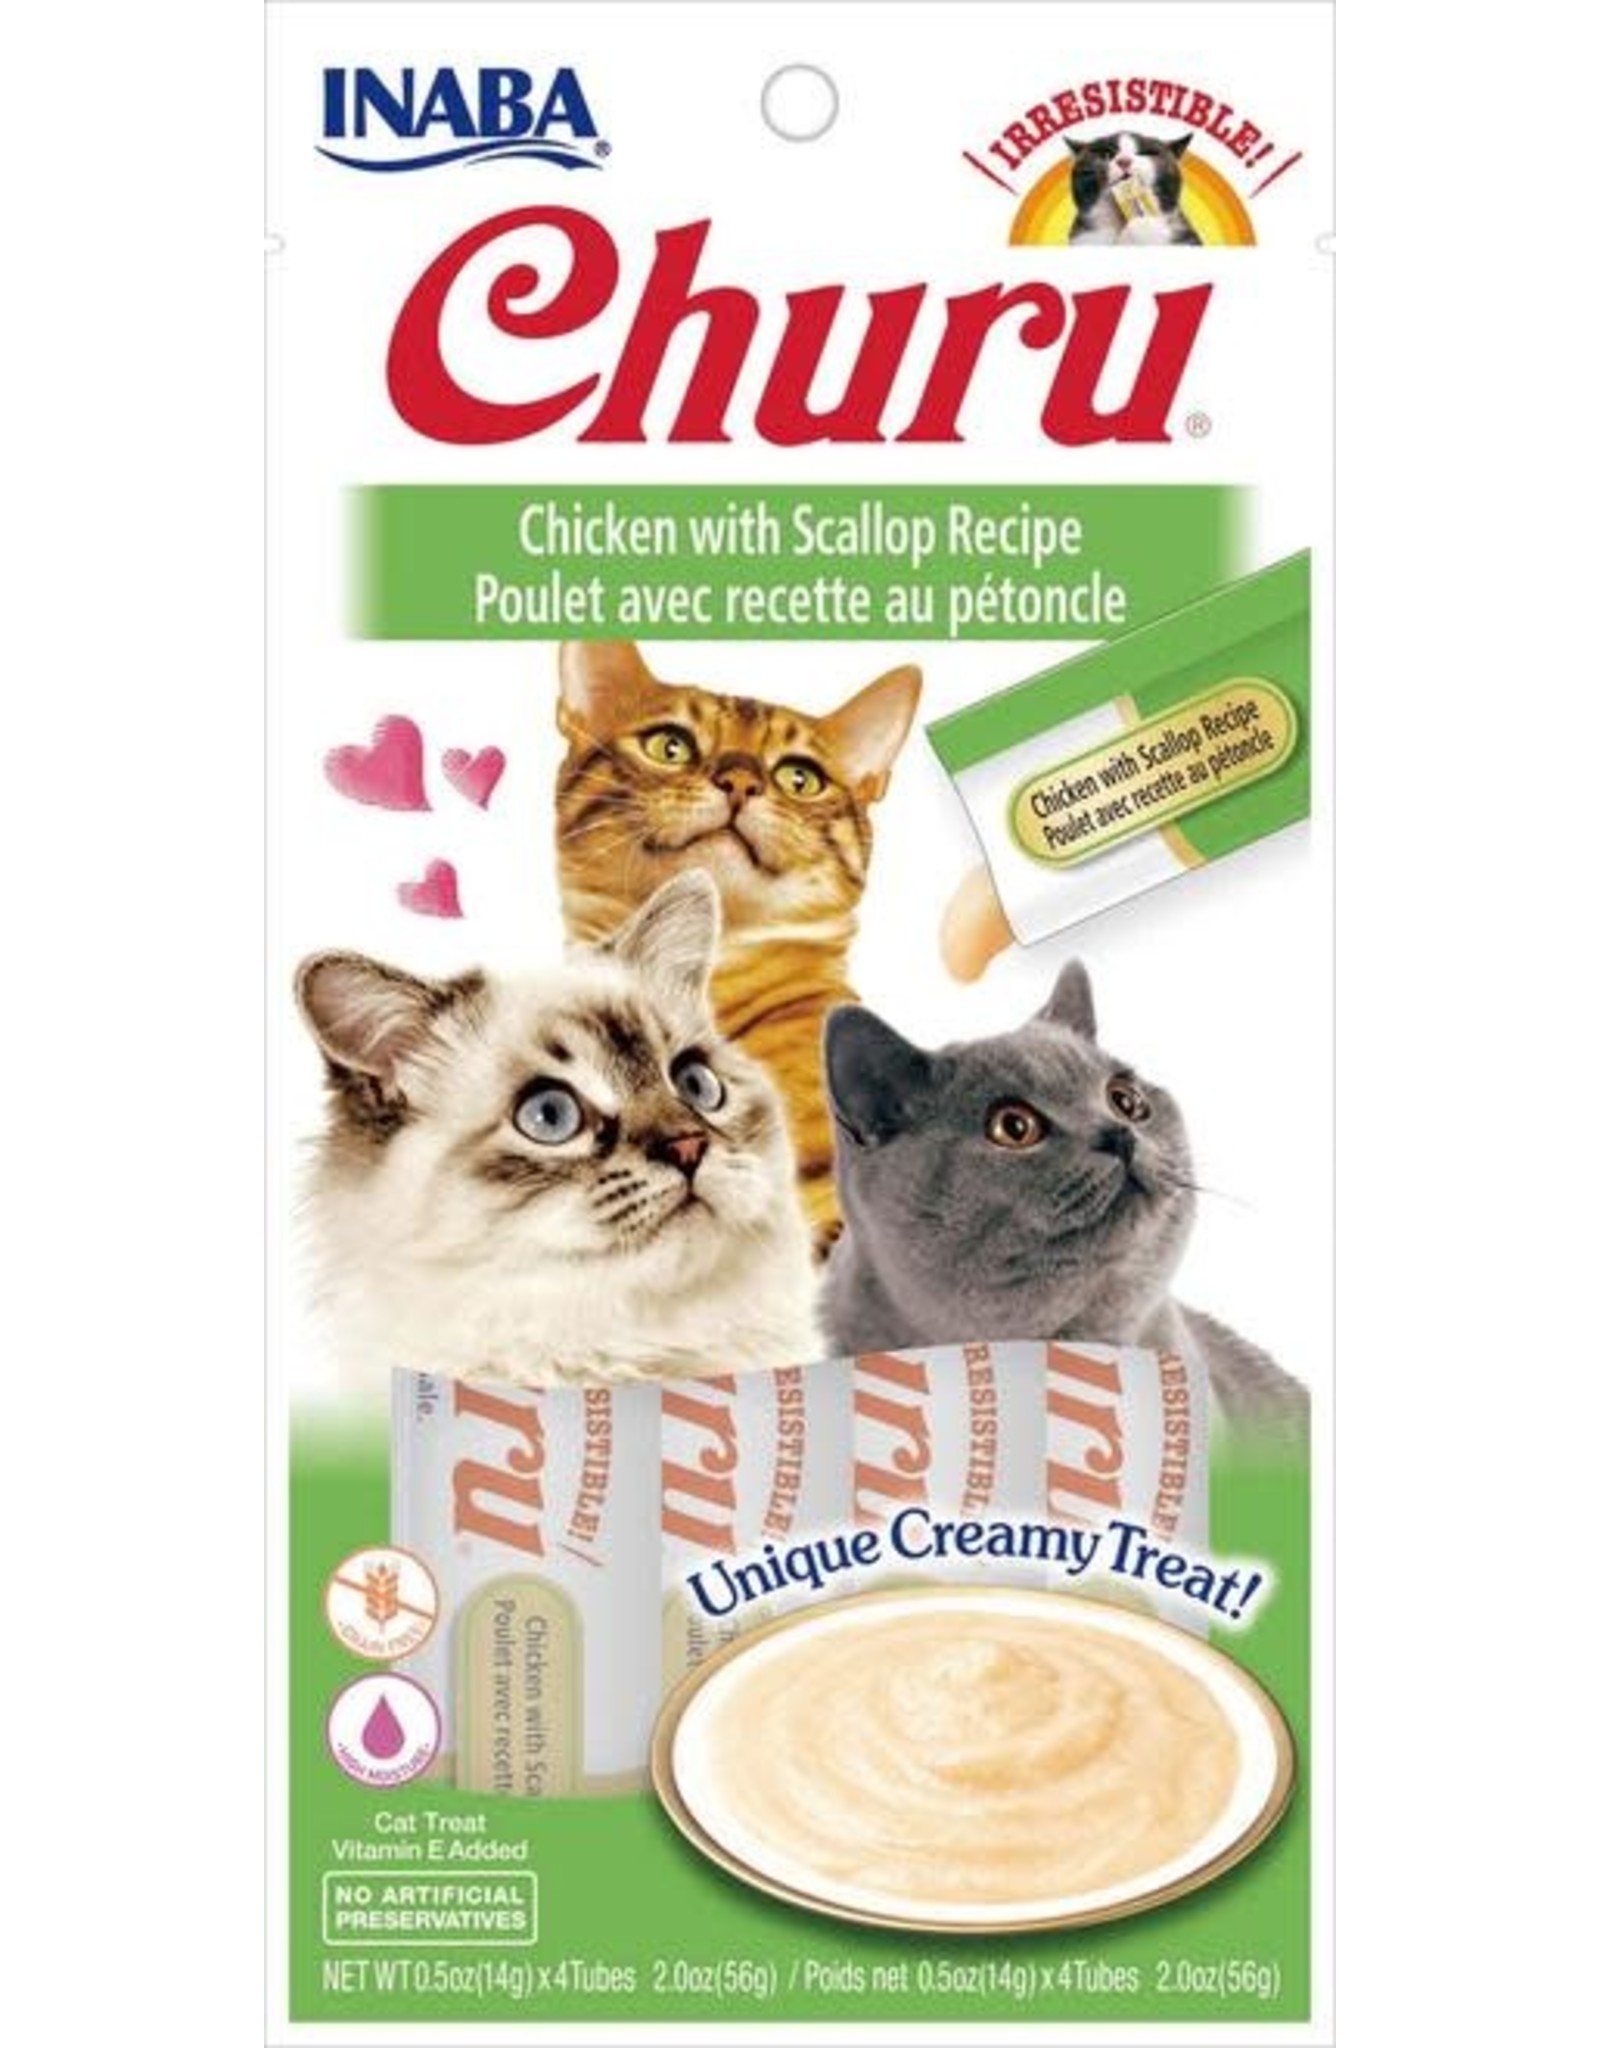 Inaba INABA CAT CHURU PURÉE CHICKEN WITH SCALLOP RECIPE 4-COUNT